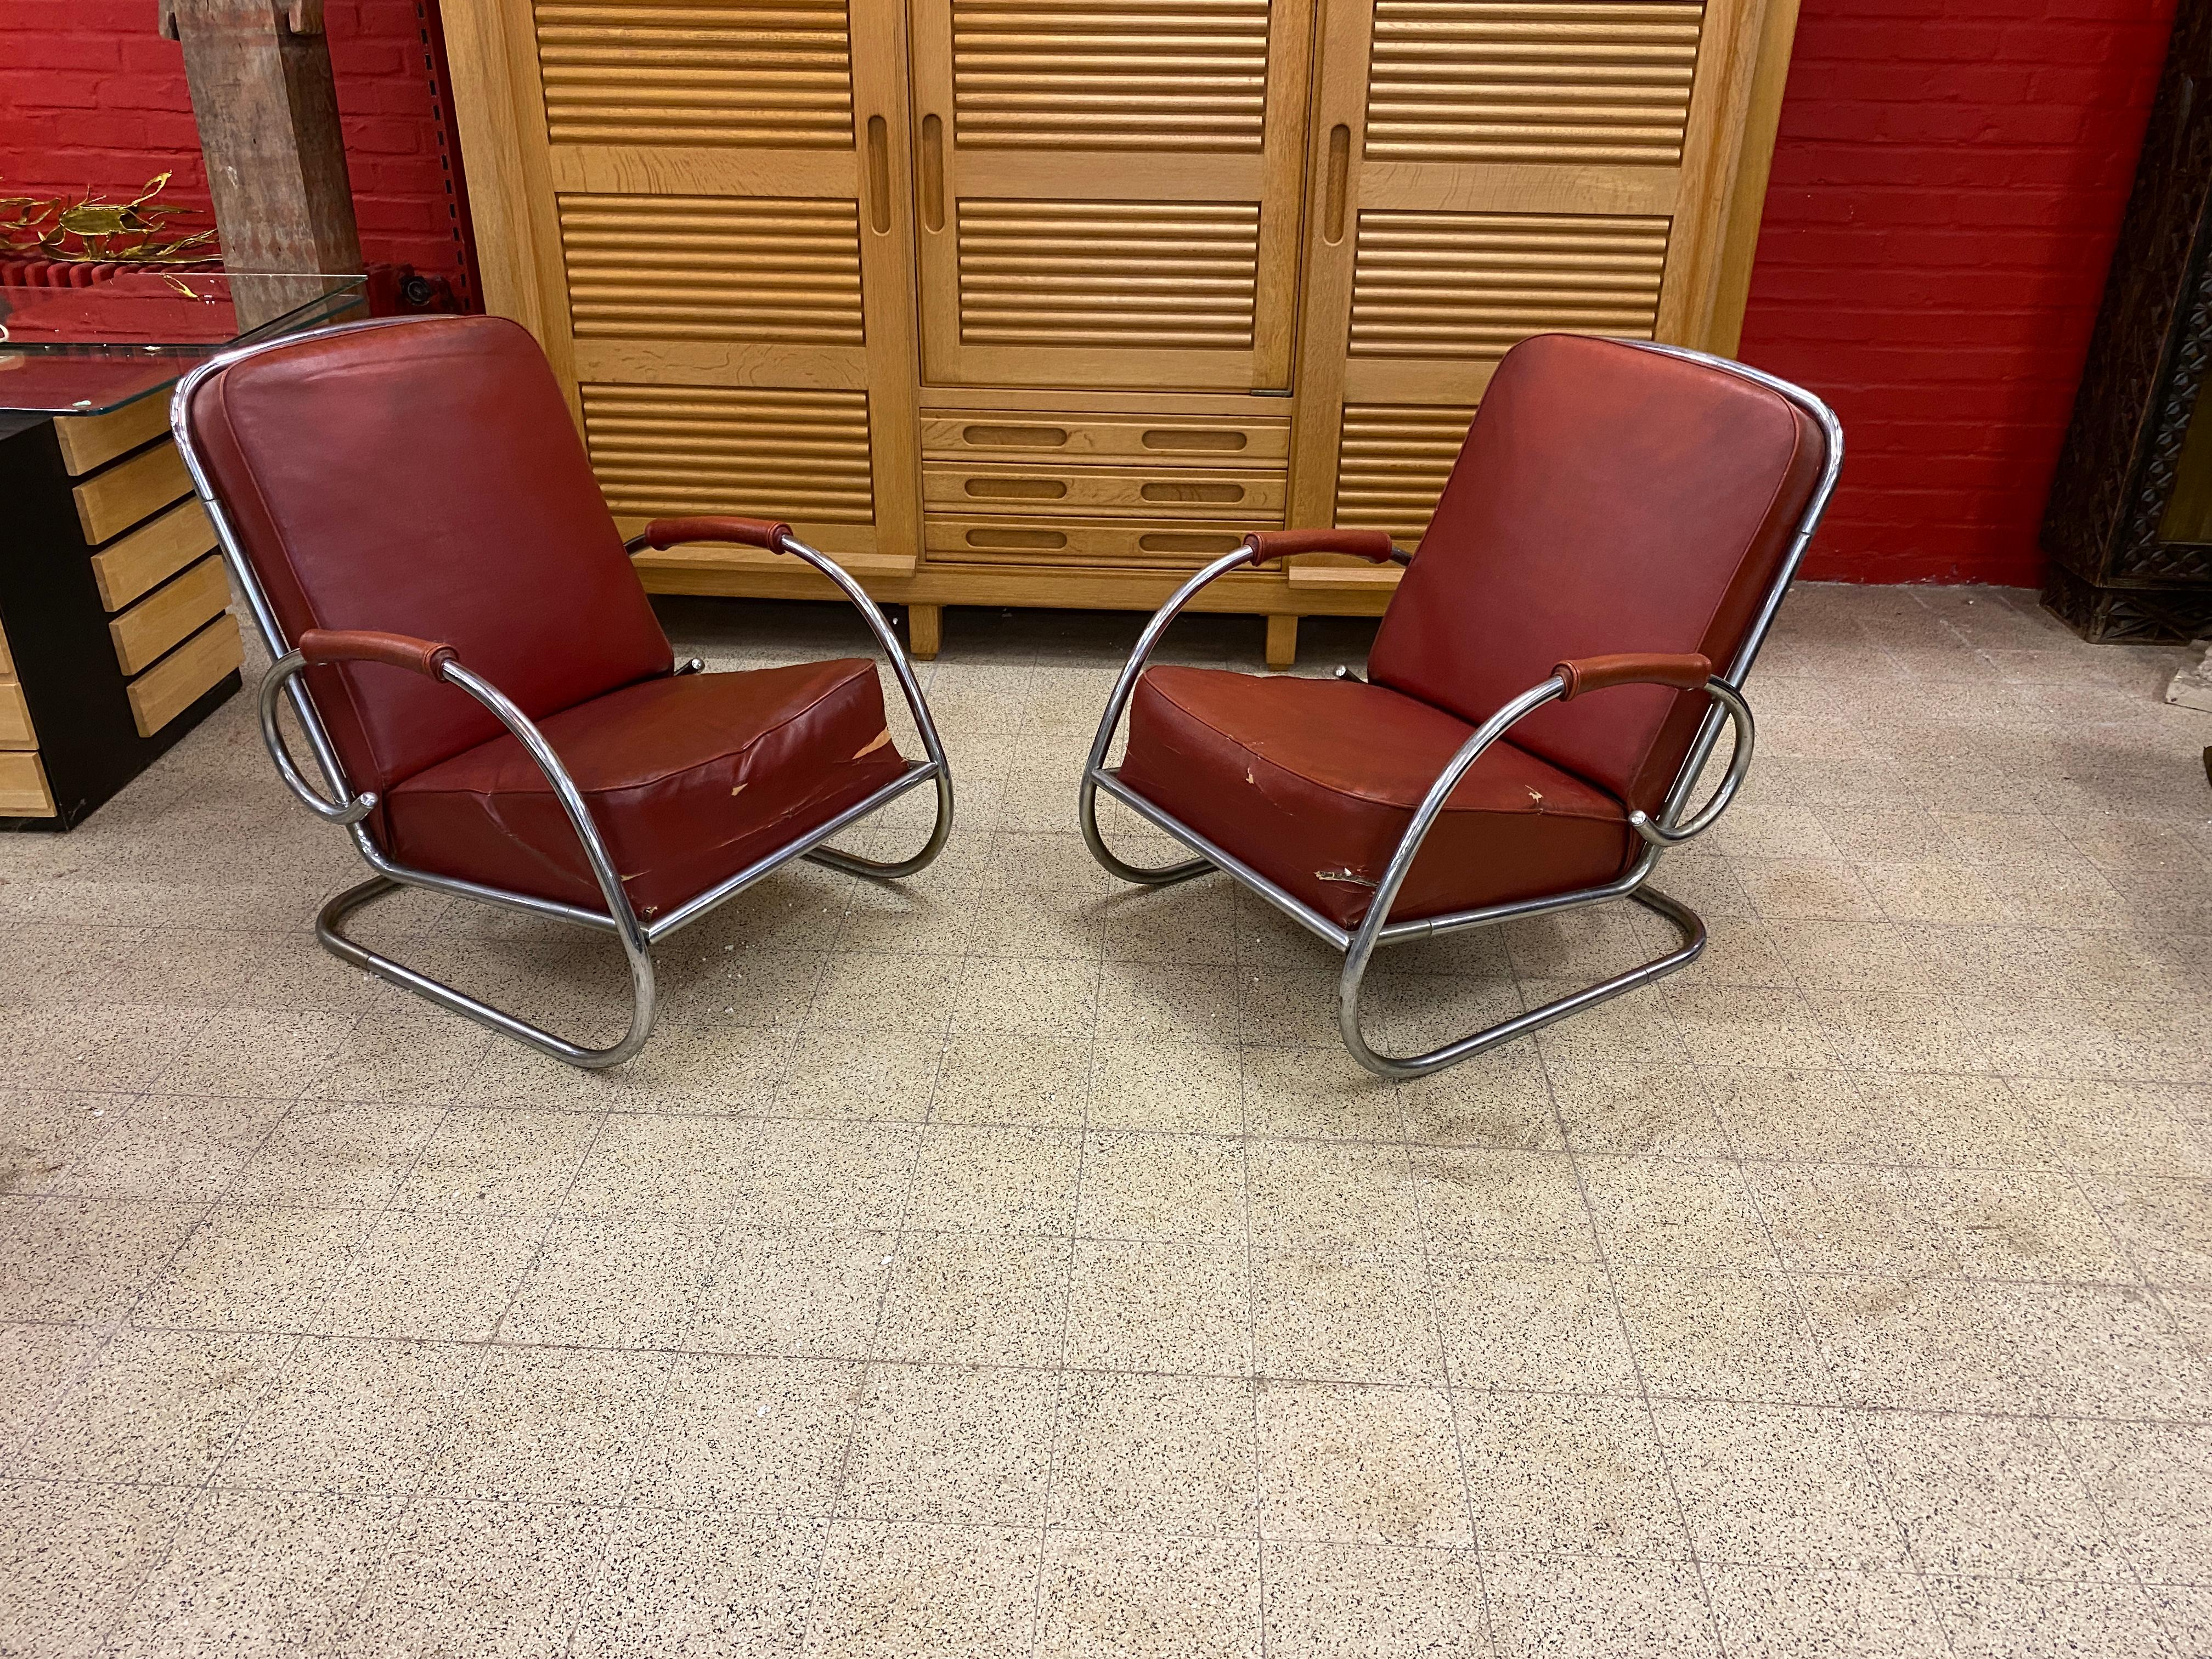 2 modernist Art Deco armchairs in chromed metal and faux leather, circa 1920-1930.
metal in good condition
coating to redo.
